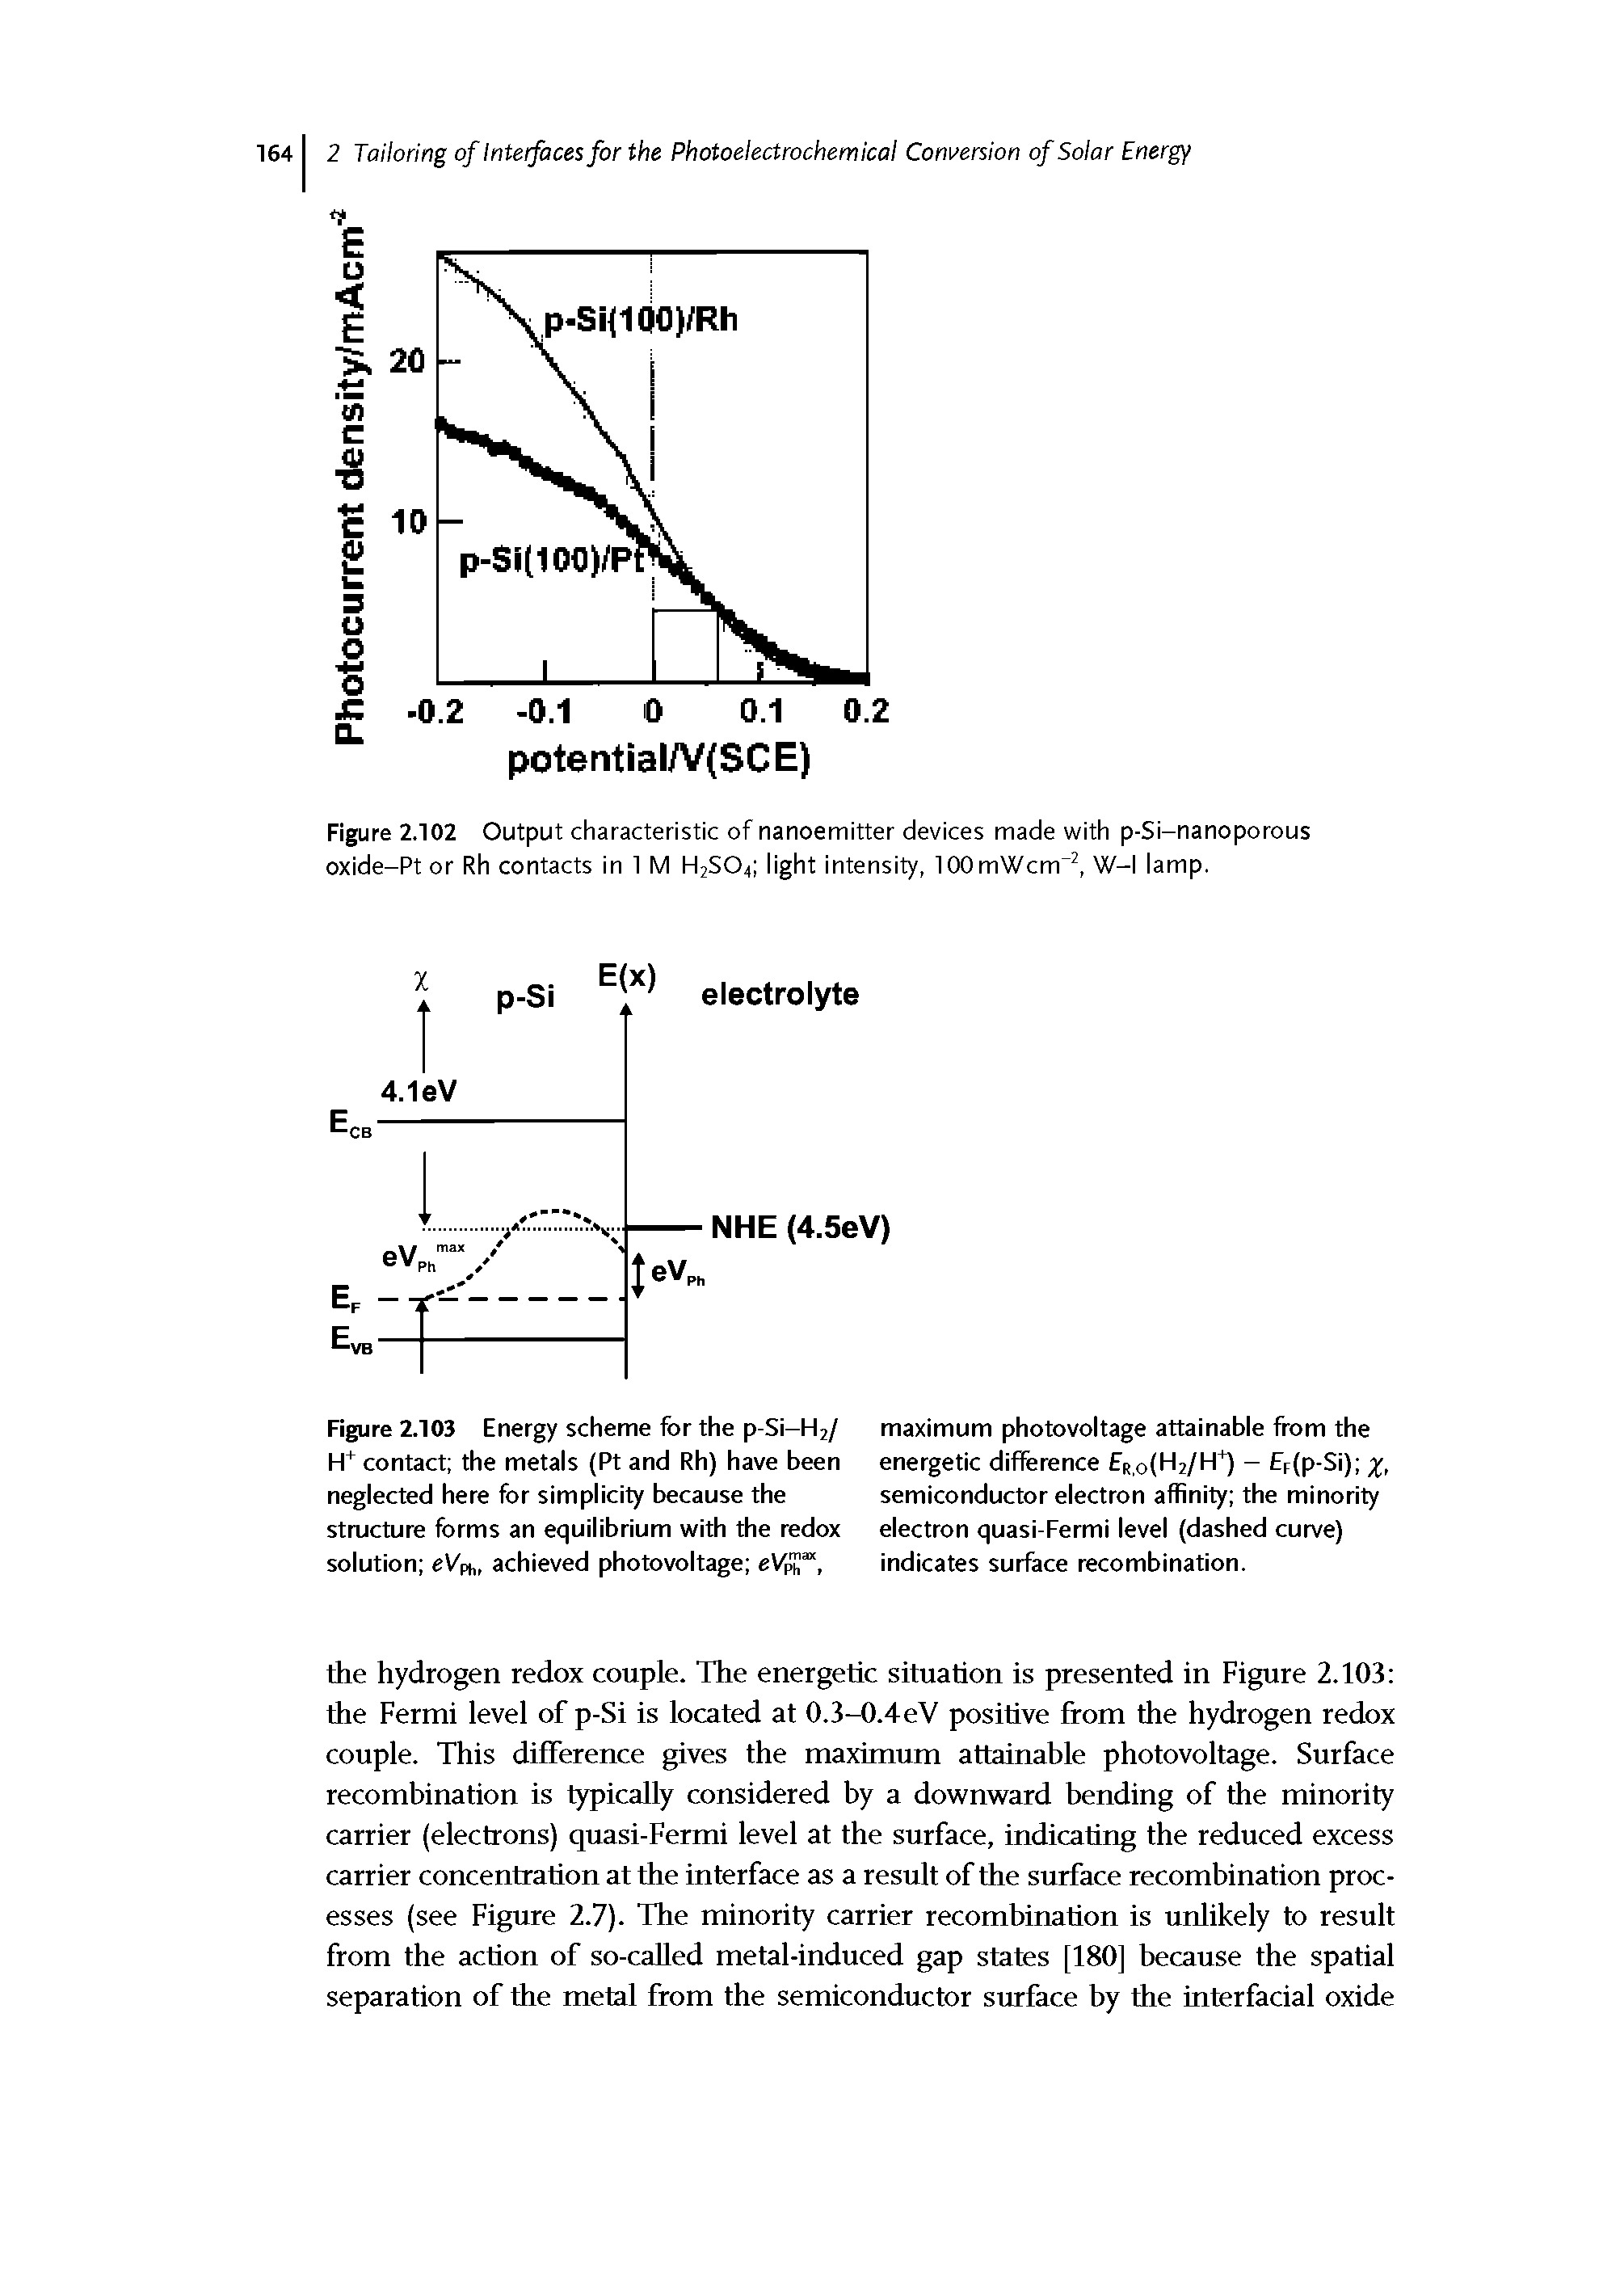 Figure 2.103 Energy scheme for the p-Si-H2/ H contact the metals (Pt and Rh) have been neglected here for simplicity because the structure forms an equilibrium with the redox solution eVpi, achieved photovoltage eVS ,...